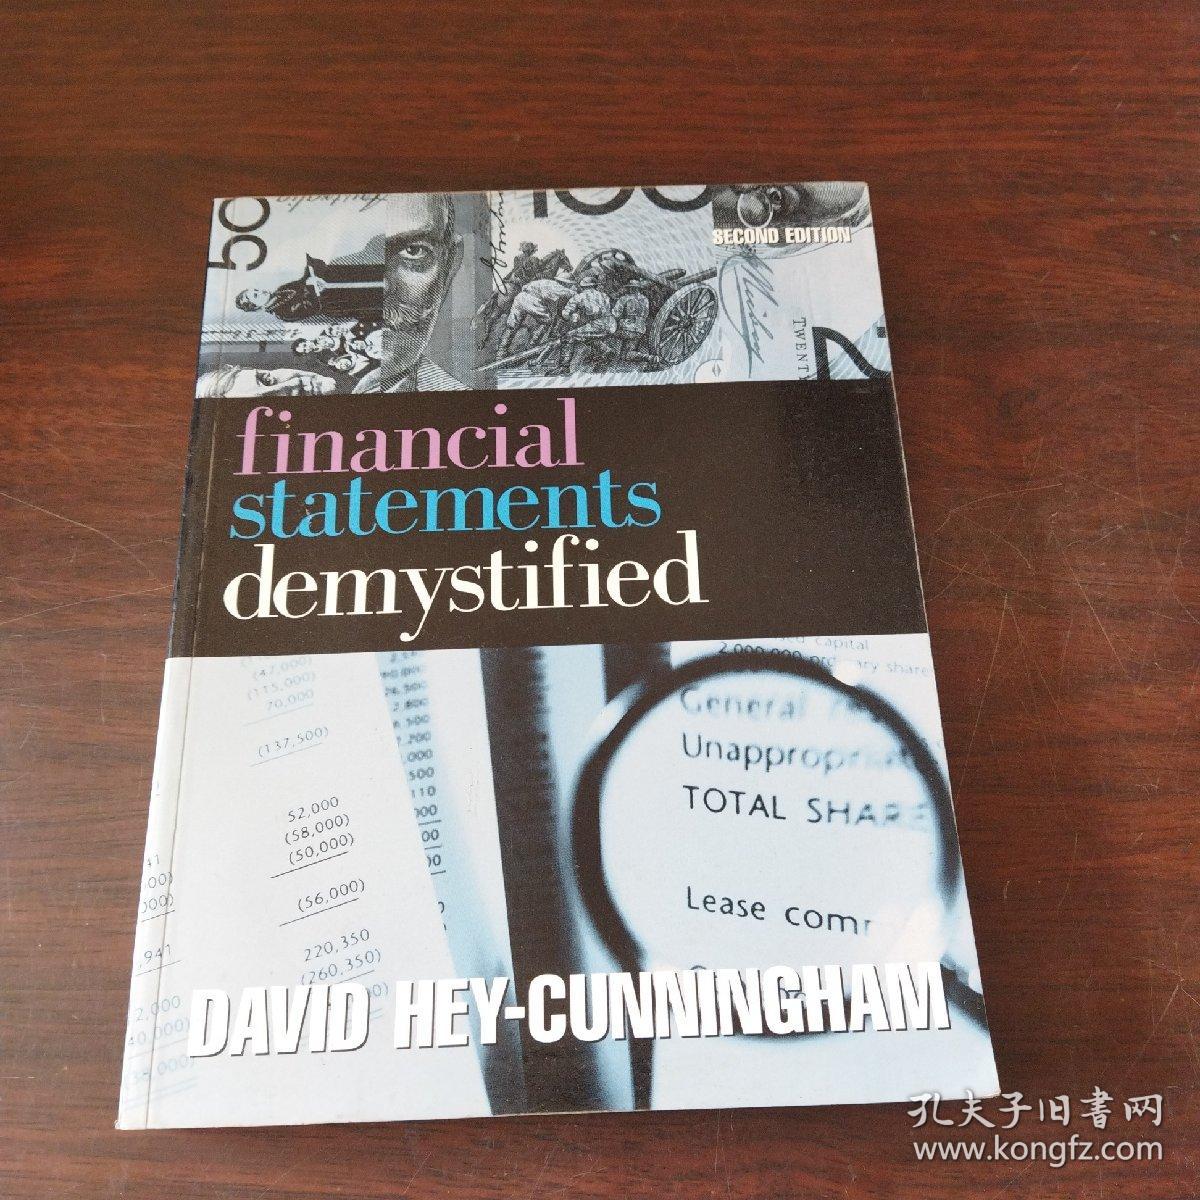 FINANCIAL STATEMENTS DEMYSTIFIED（SECOND EDITION)